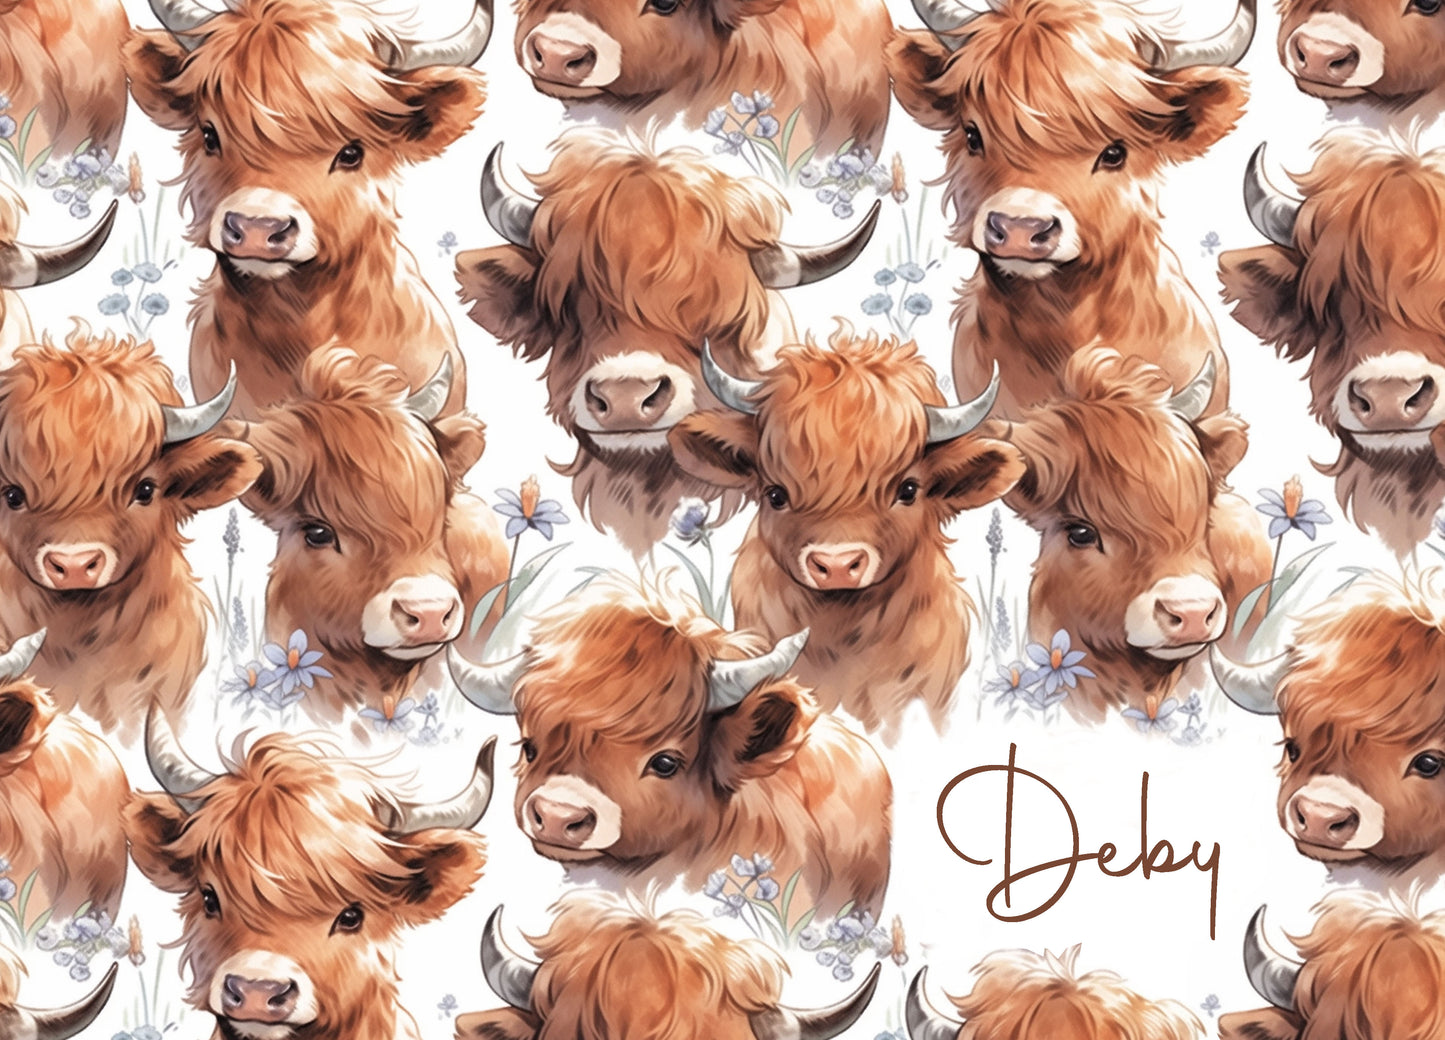 Deby- Highland Cow Print- Notebook & Cover